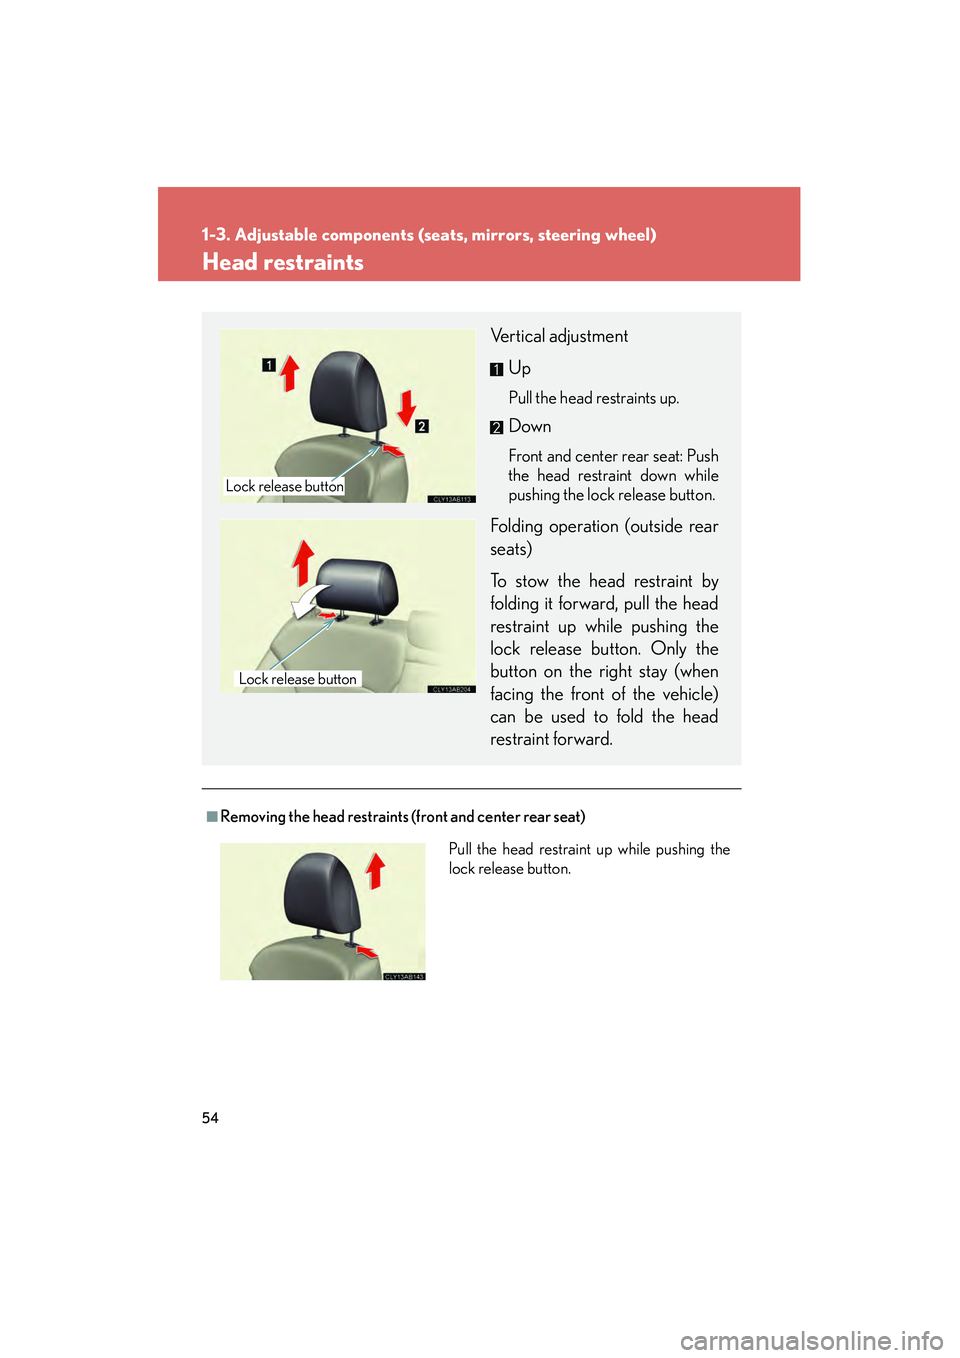 Lexus IS250 2009 User Guide 54
1-3. Adjustable components (seats, mirrors, steering wheel)
08_IS350/250_U_(L/O_0808)
Head restraints
■Removing the head restraints (front and center rear seat)
Vertical adjustmentUp
Pull the hea